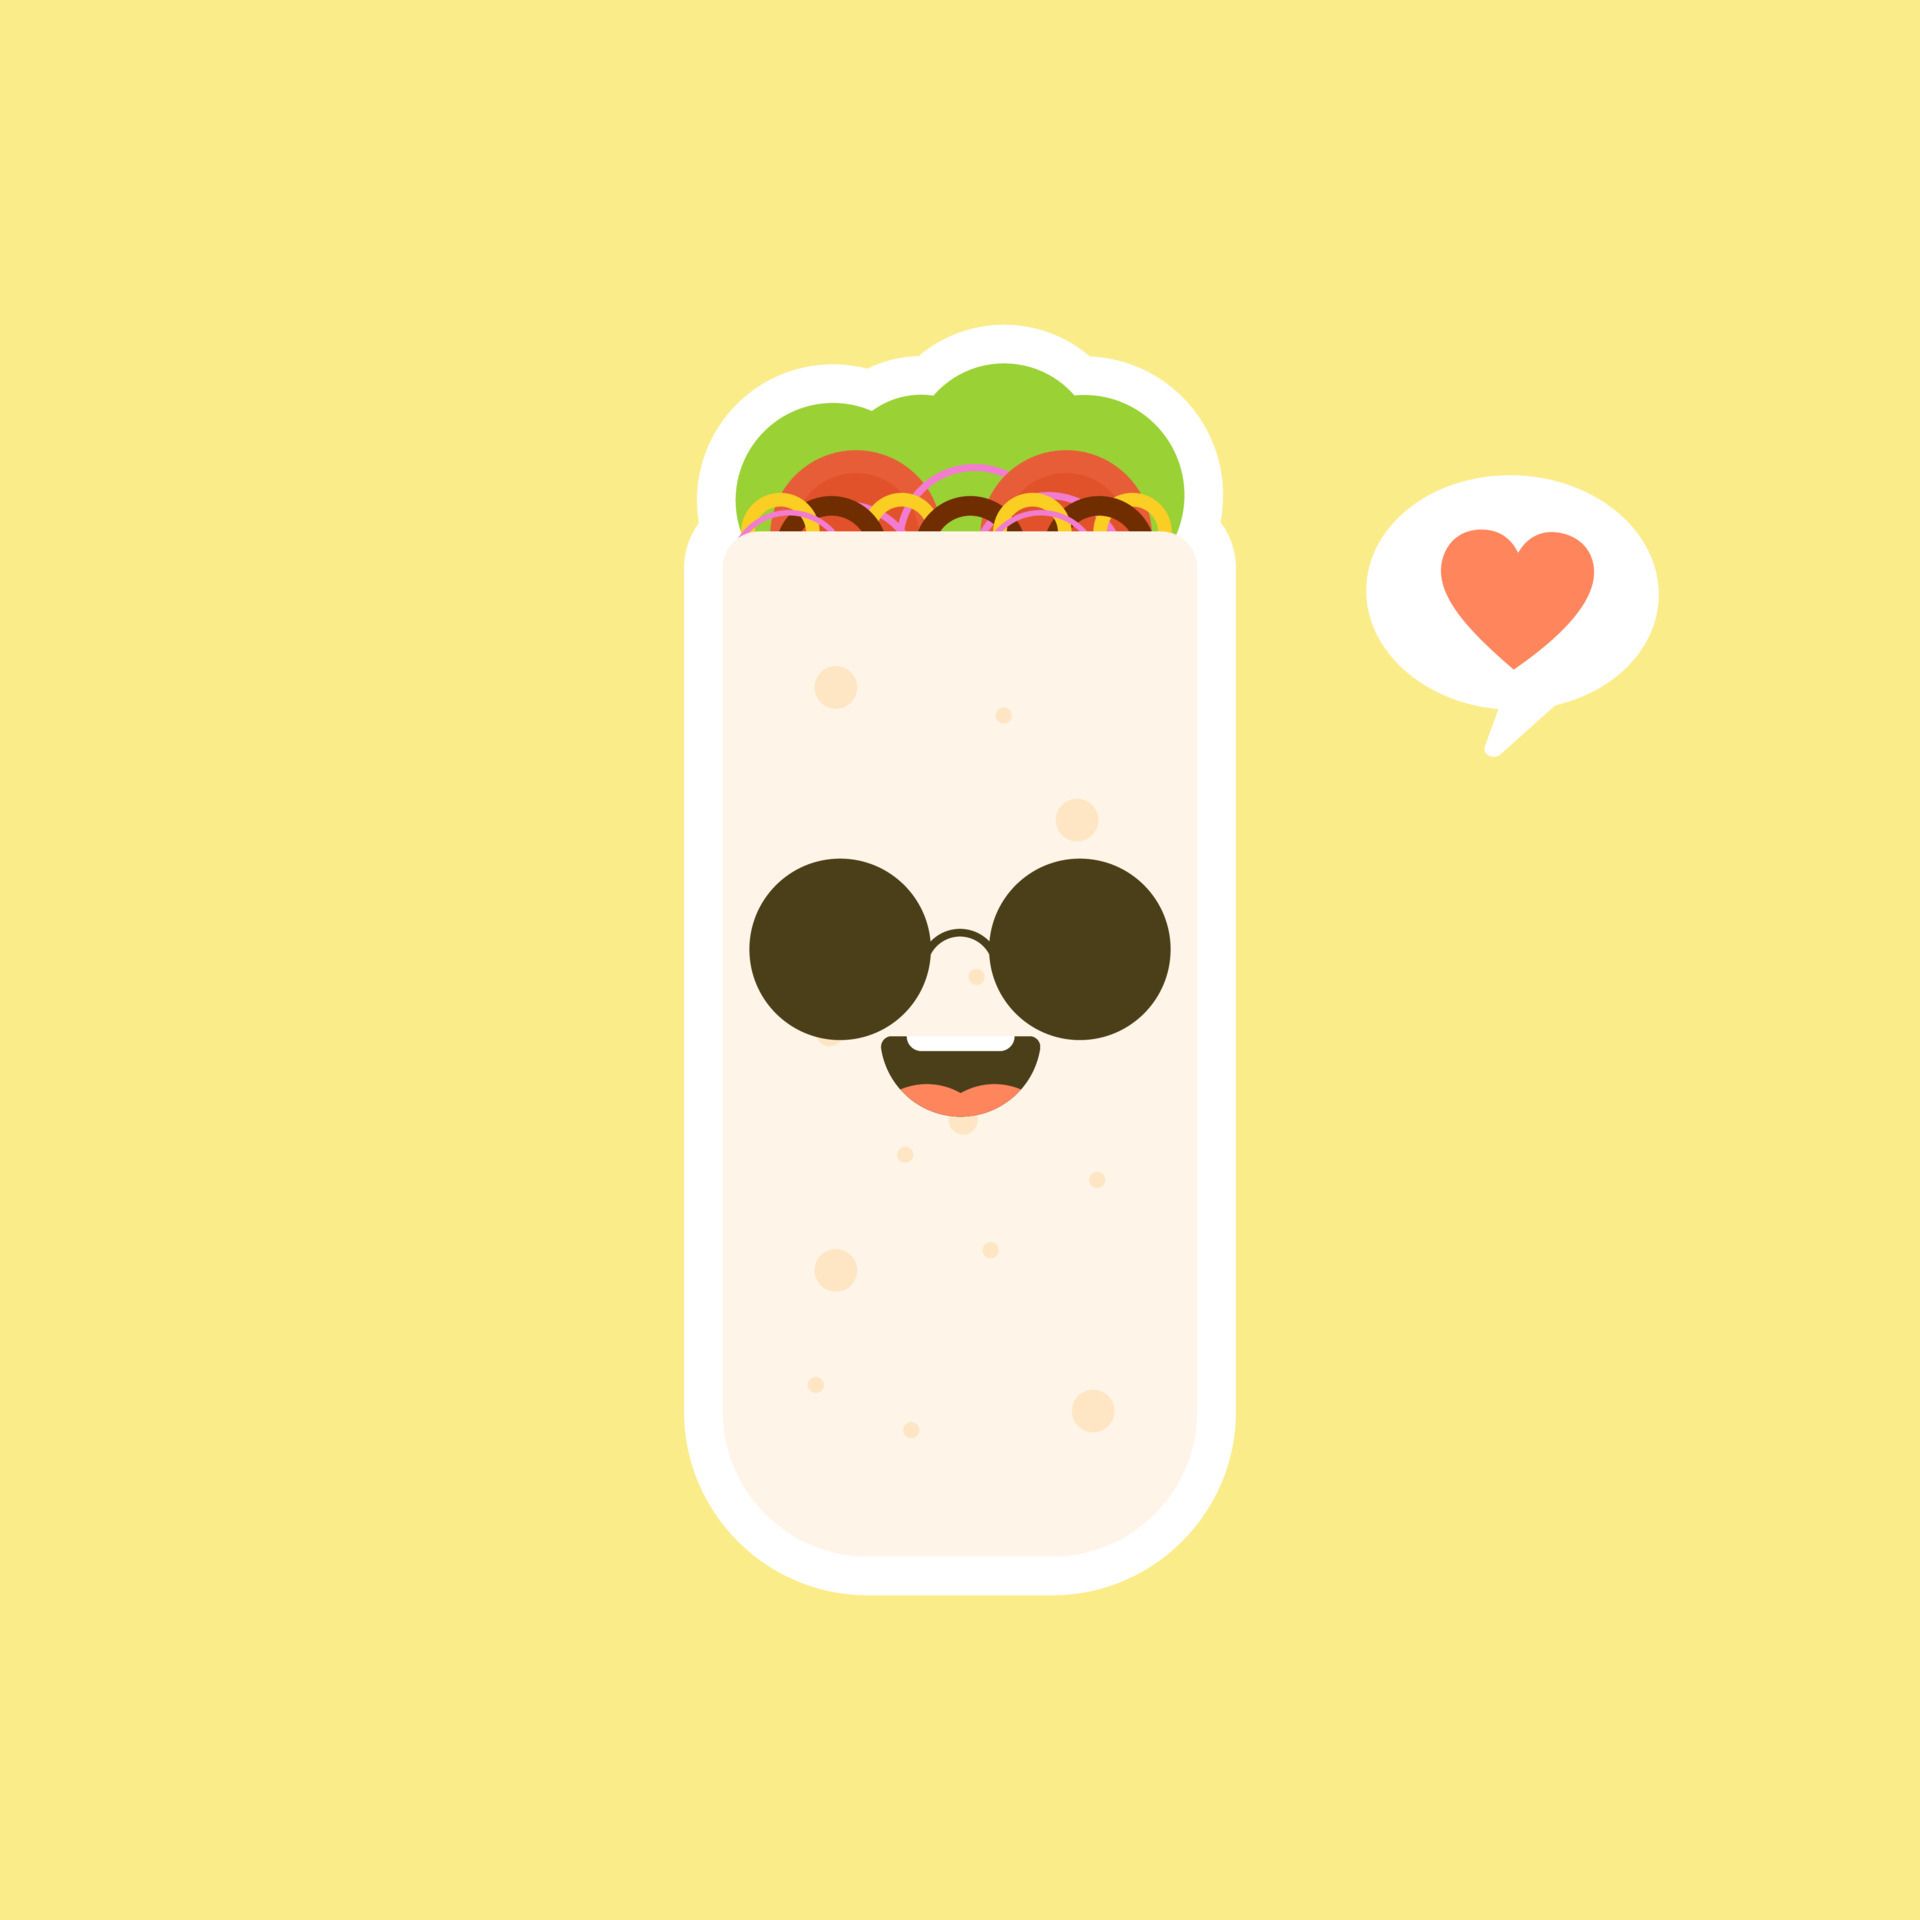 A burrito with sunglasses and heart shaped speech bubble - Food